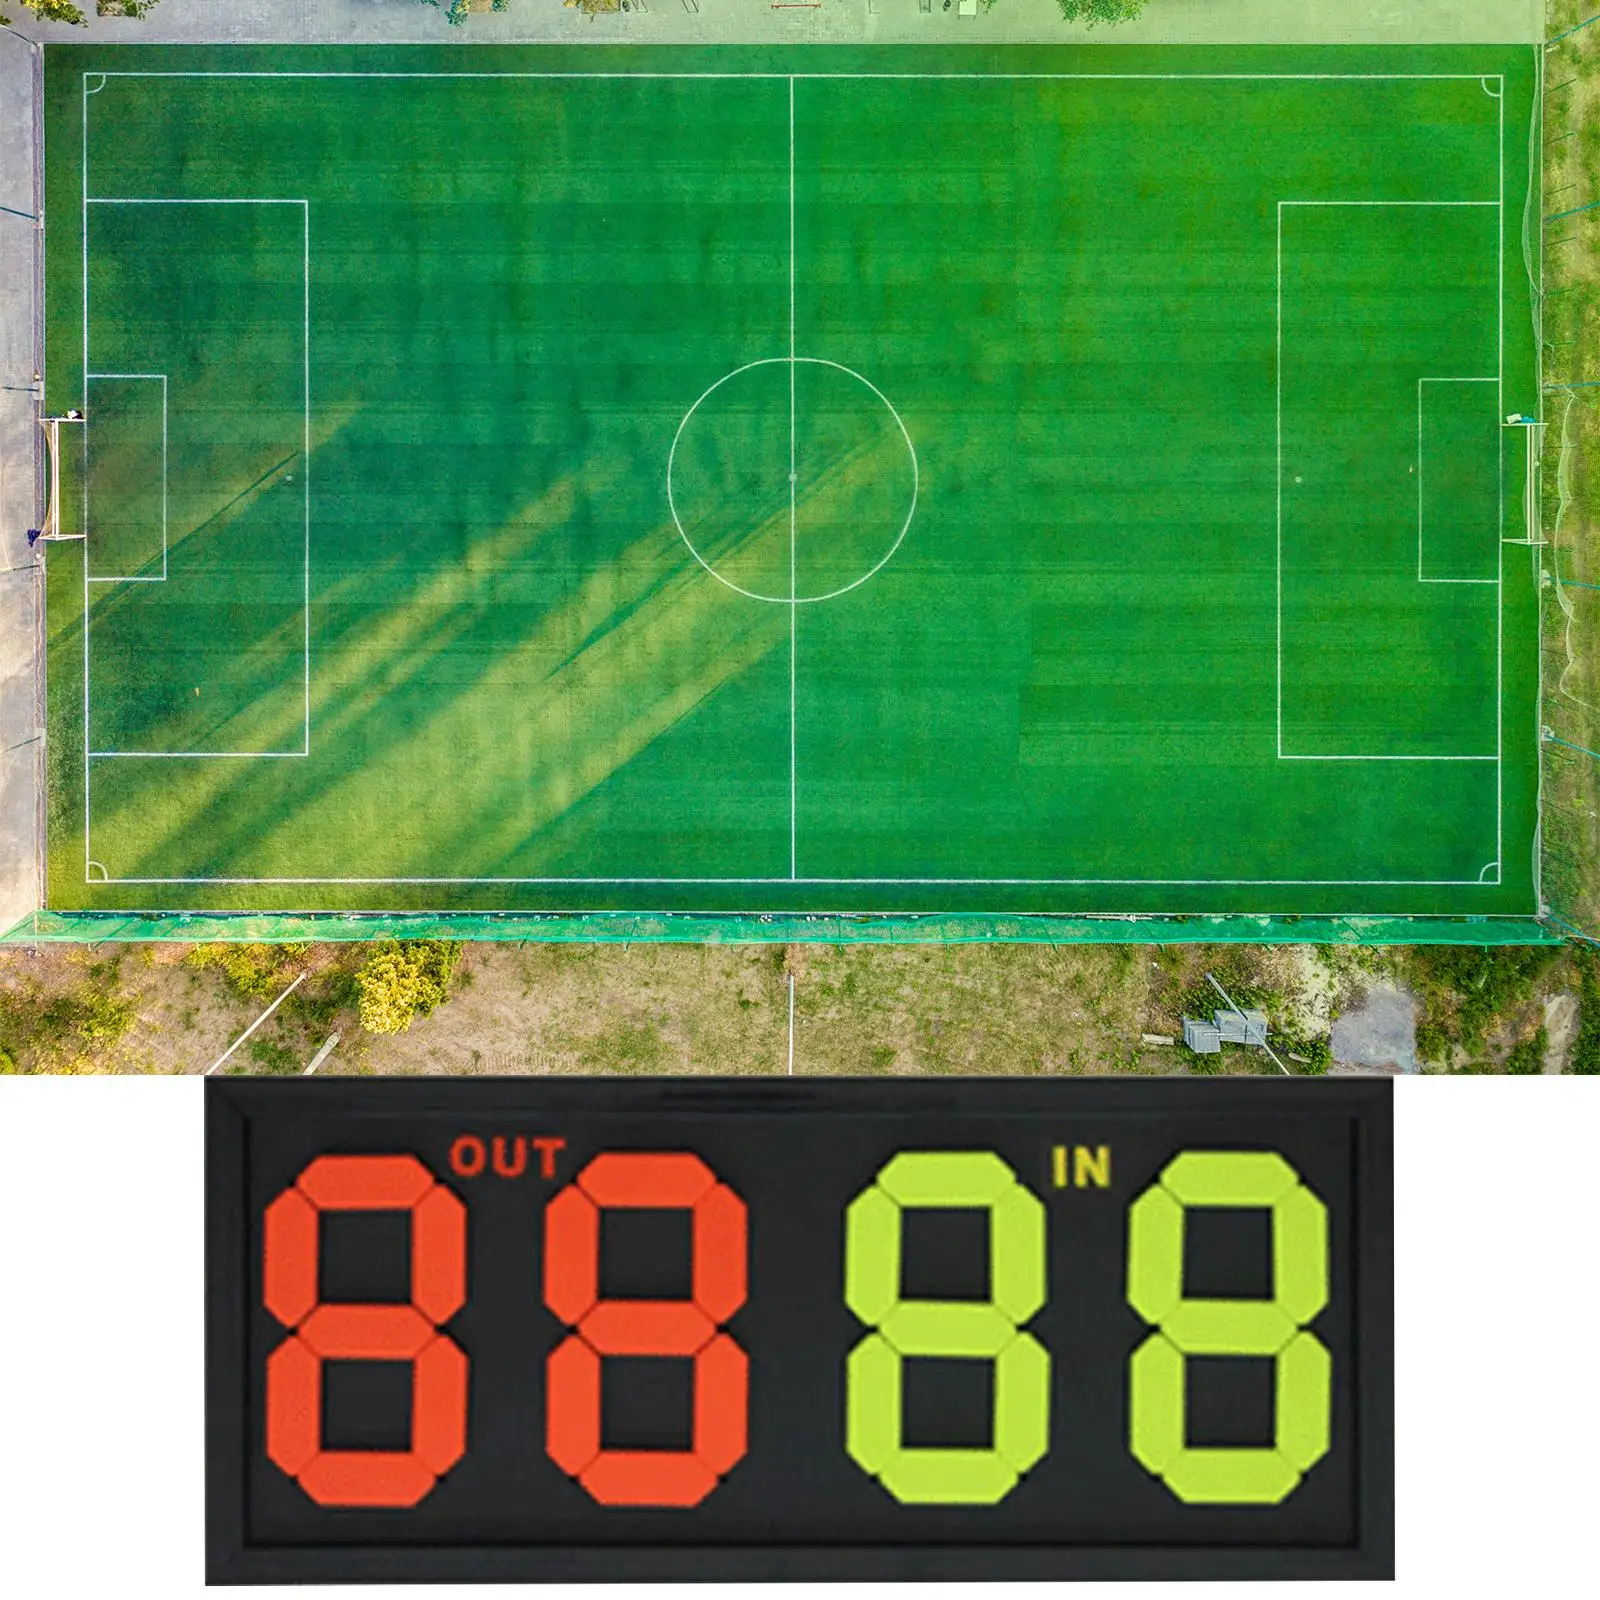 Football Soccer Manual Substitution Board Card 4 digits Fluorescent Display